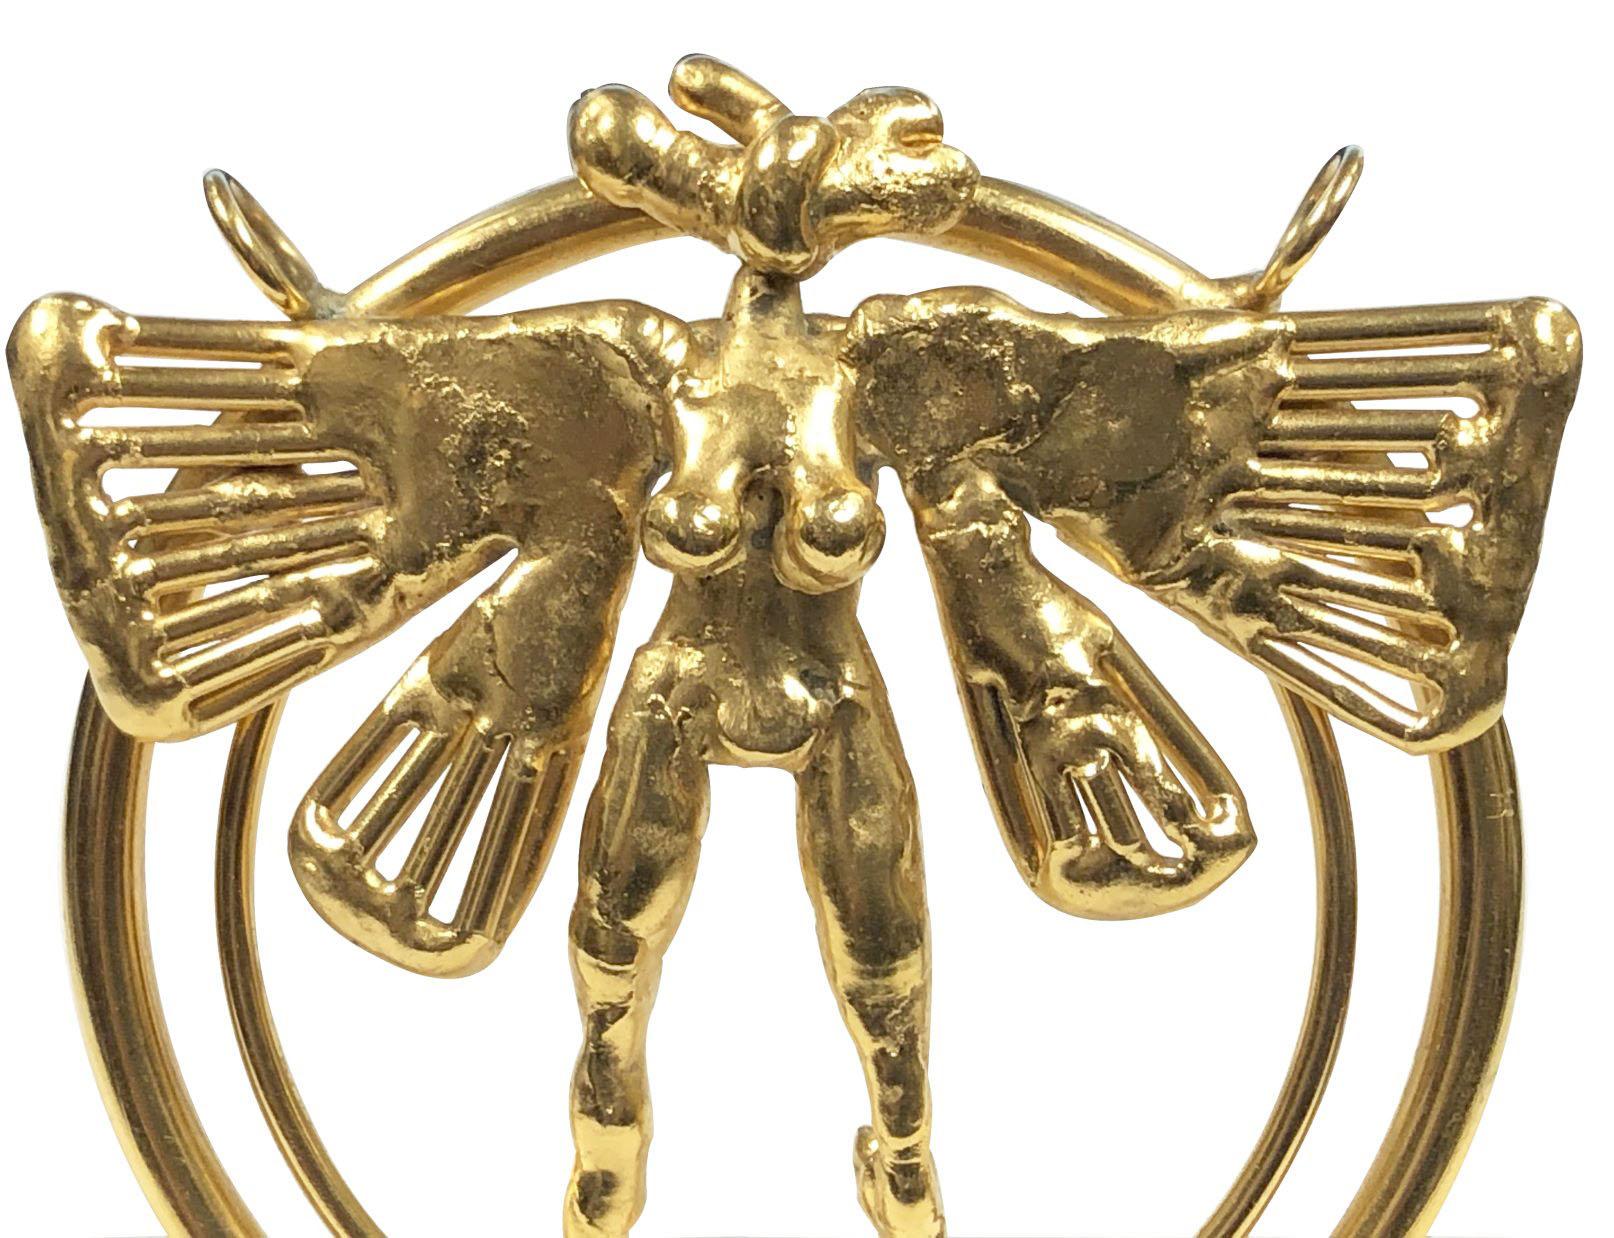 Circa 1975 Large Gold Tone Bronze Nude Winged Figural Pendant by Artist Sculptor Joseph Burlini famous for his Kinetic pieces, this piece measures 3 5/8 inches in diameter and has two loops at the top where a chain can easily slide through to be